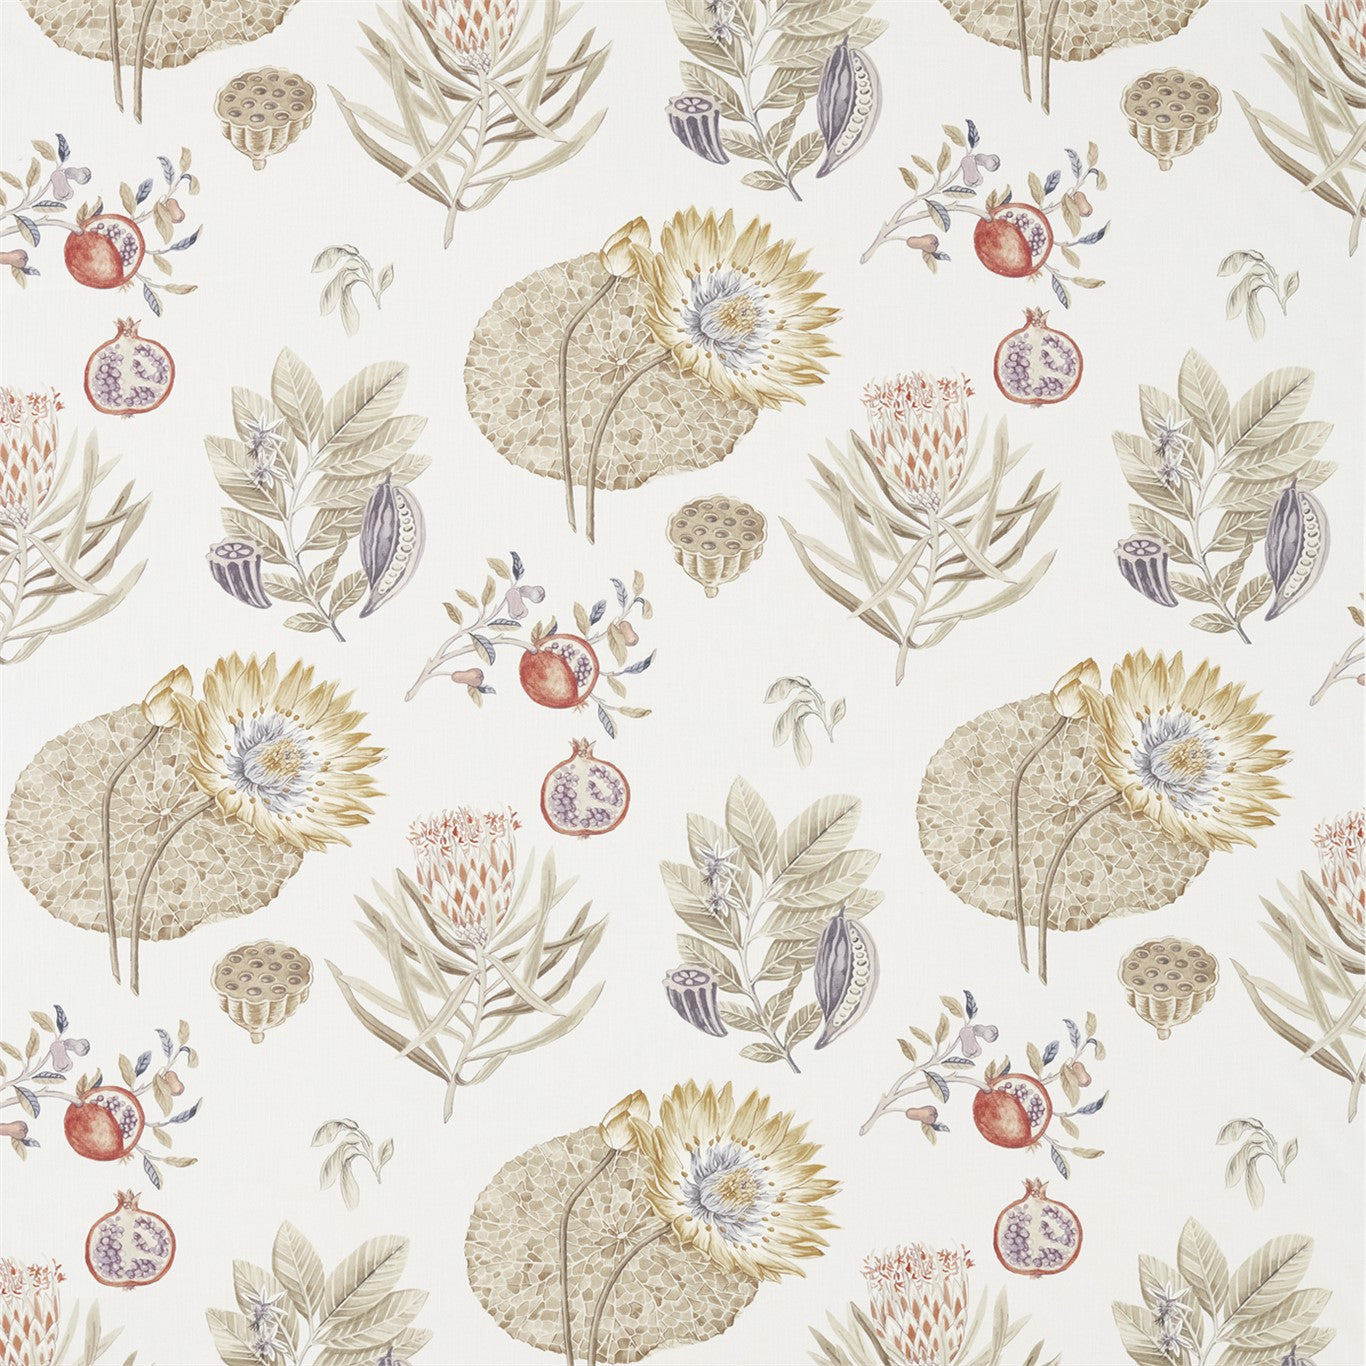 Lily Bank Fabric by Sanderson